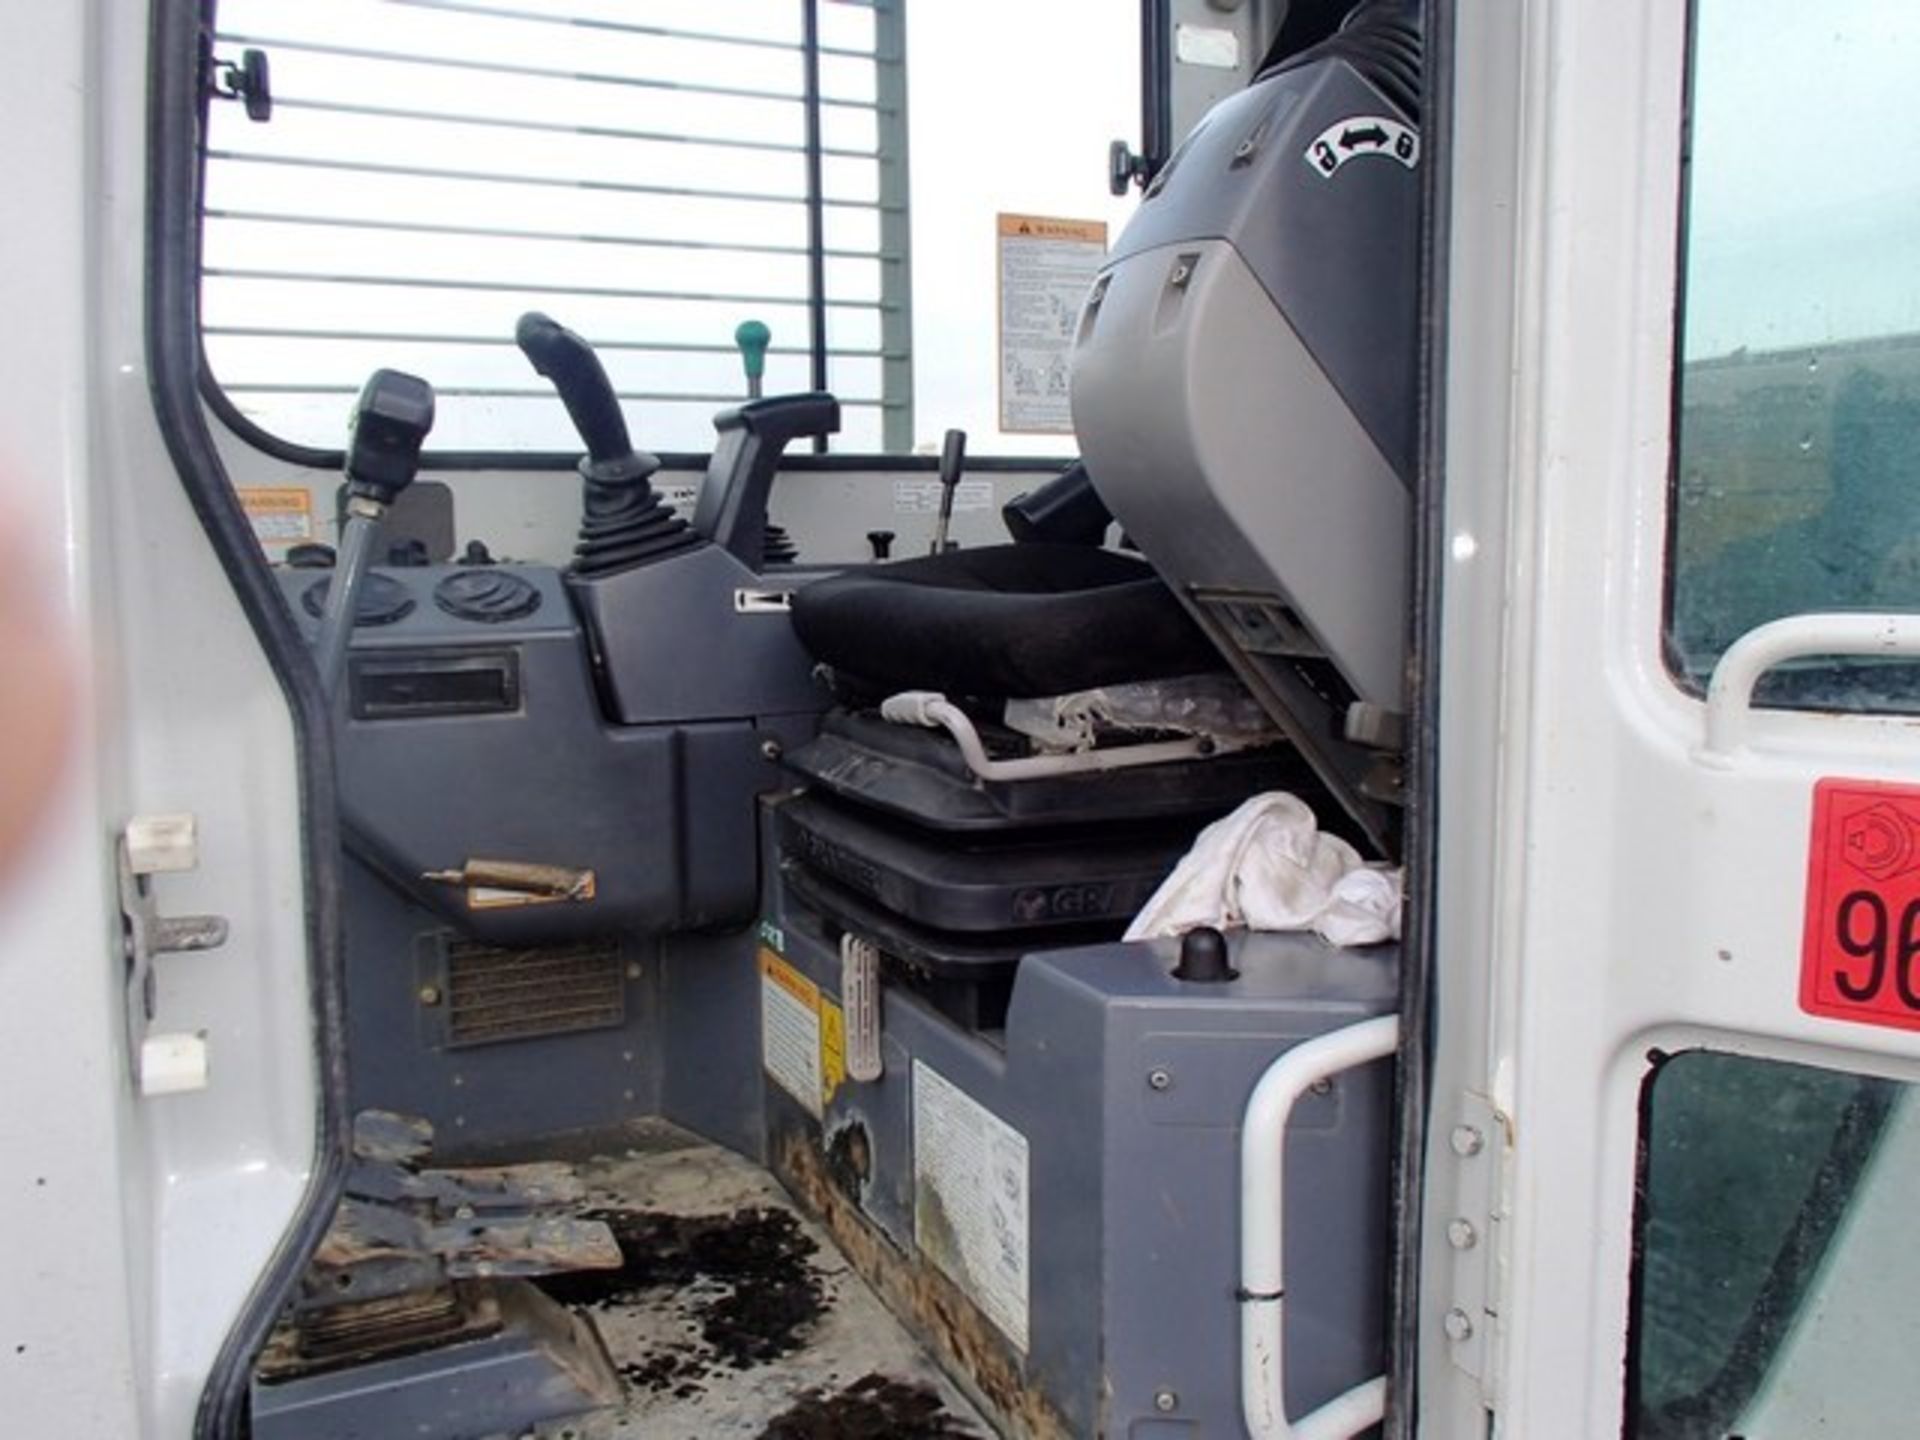 2013 TAKEUCHI TB153FR EXCAVATOR, SN 158301909, 4405 HOURS (NOT VERIFIED), AUX PIPE WORK, HYDRAULIC - Image 11 of 13